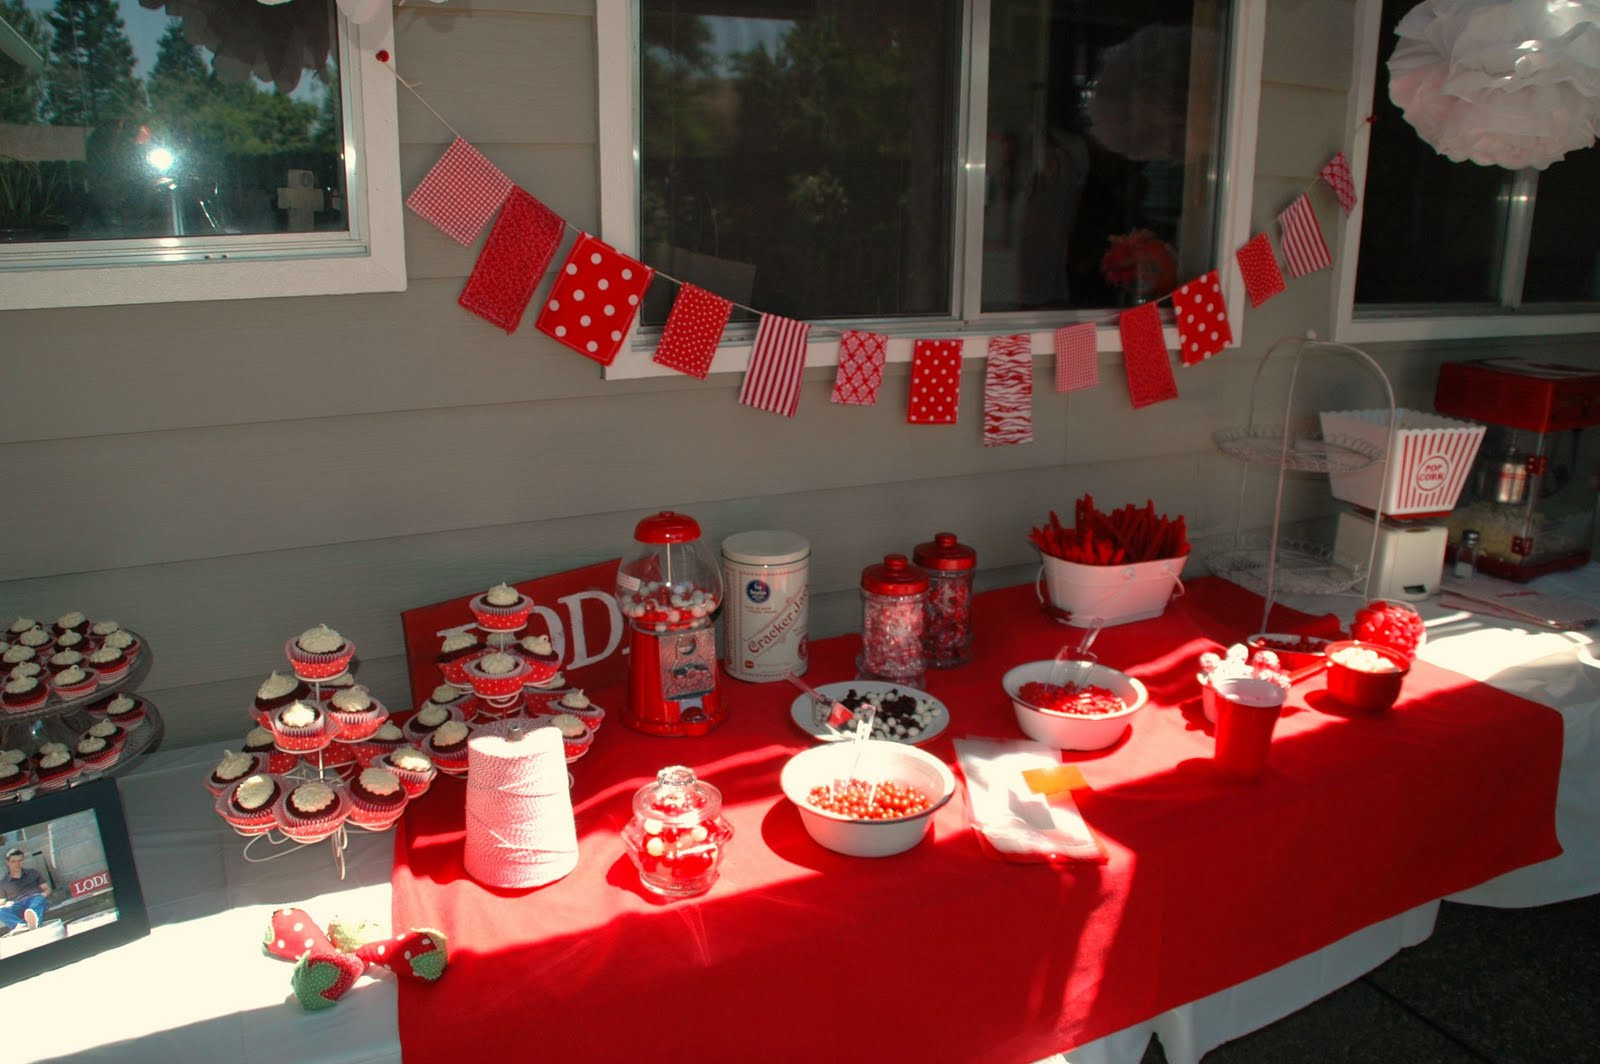 Red Black And White Graduation Party Ideas
 Lipstick and Laundry Red and White Graduation Party